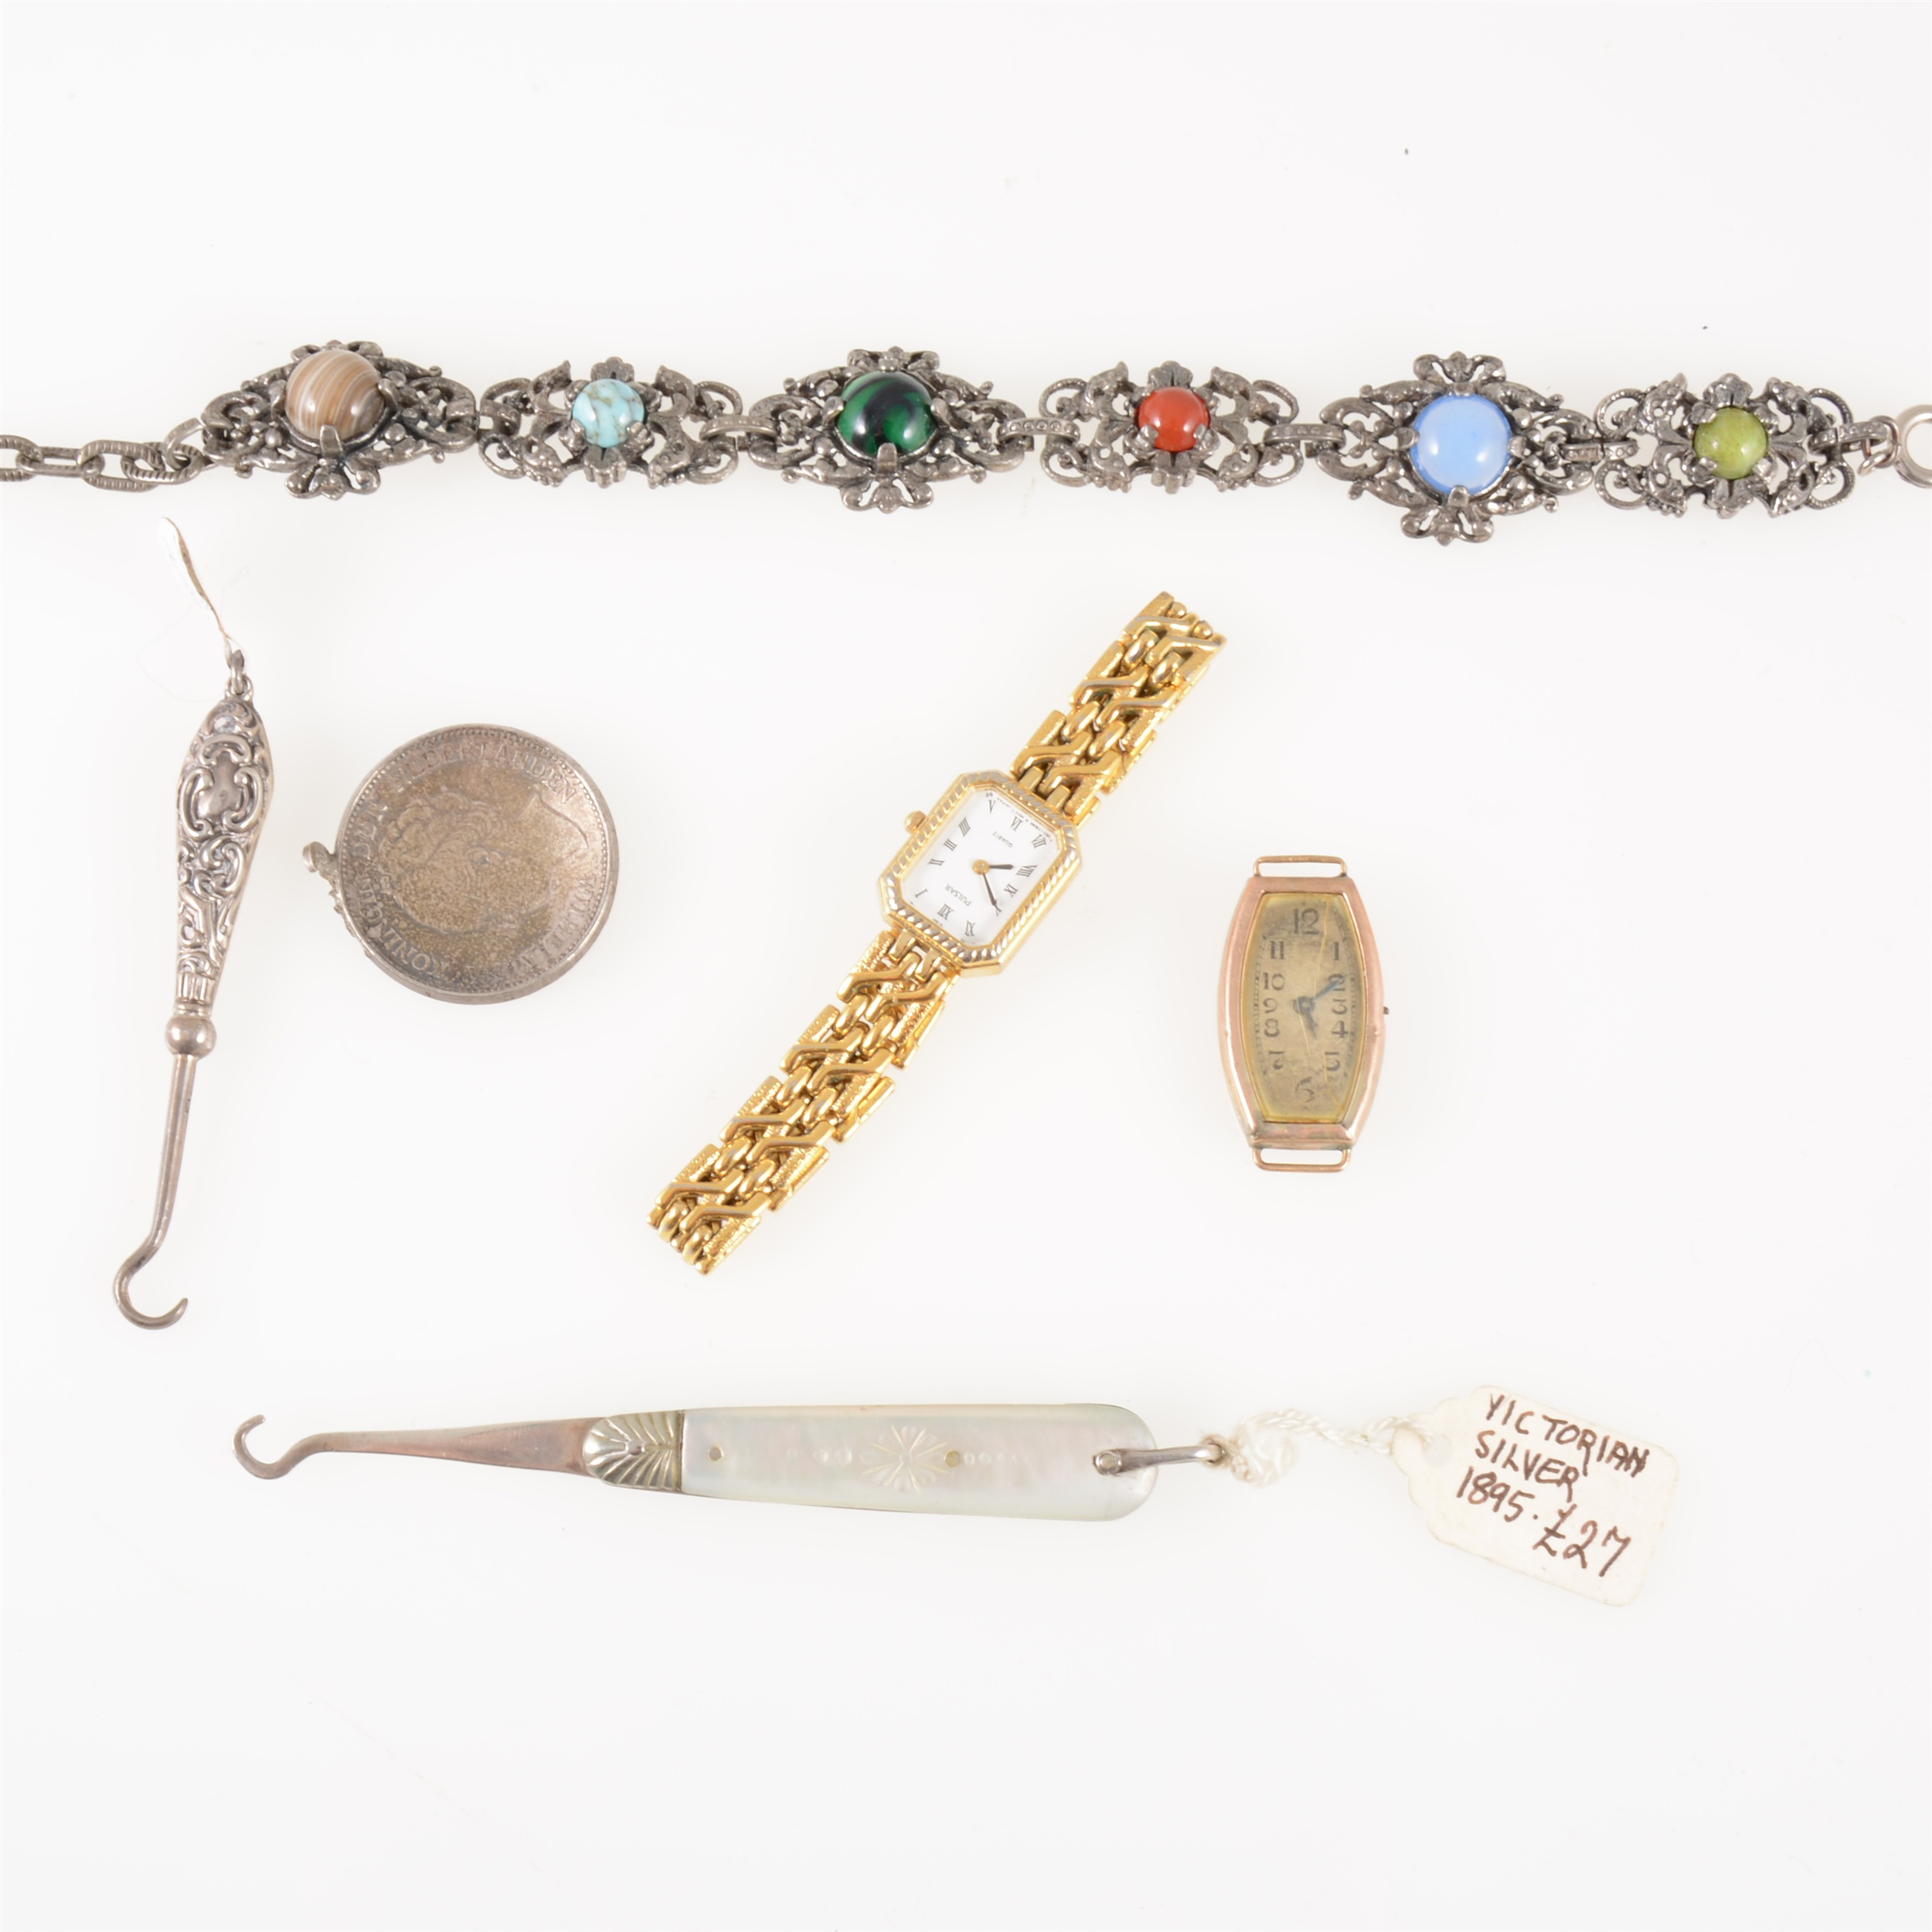 A box of collectables and jewellery, two small mother of pearl button hooks and a silver handled